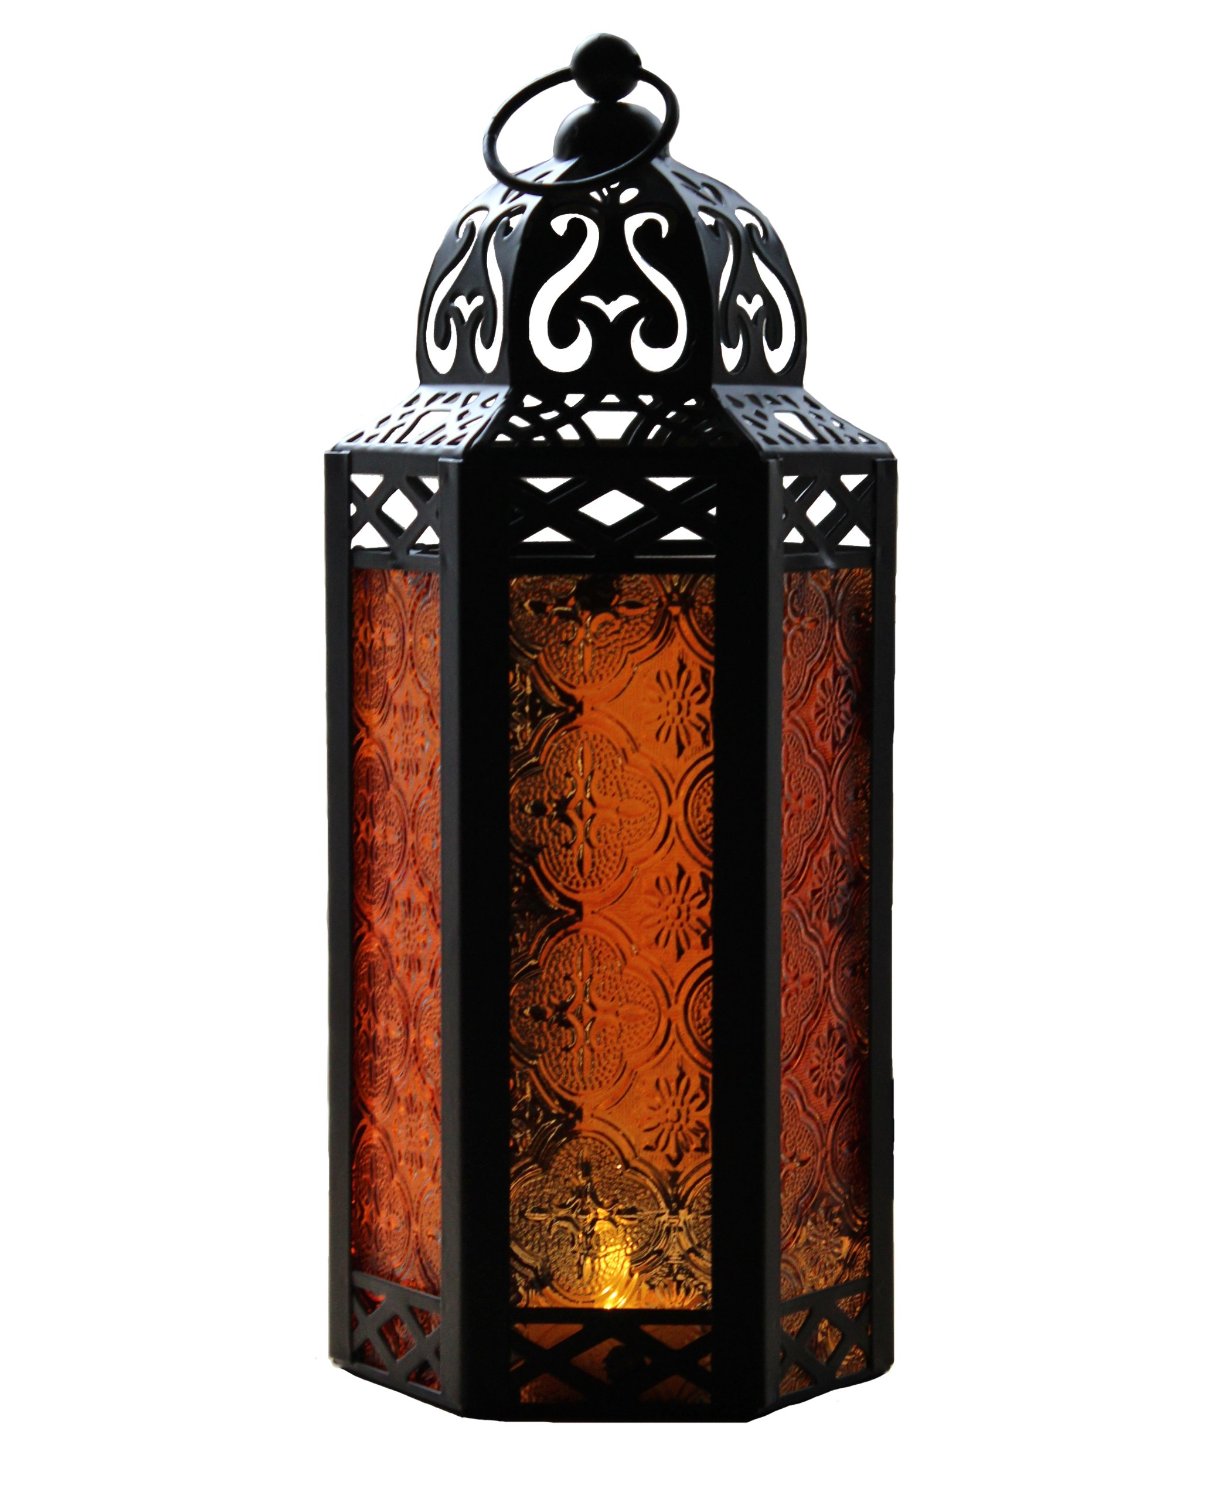 Amber Glass Hexagon Moroccan Candle Lantern – Just $15.88!